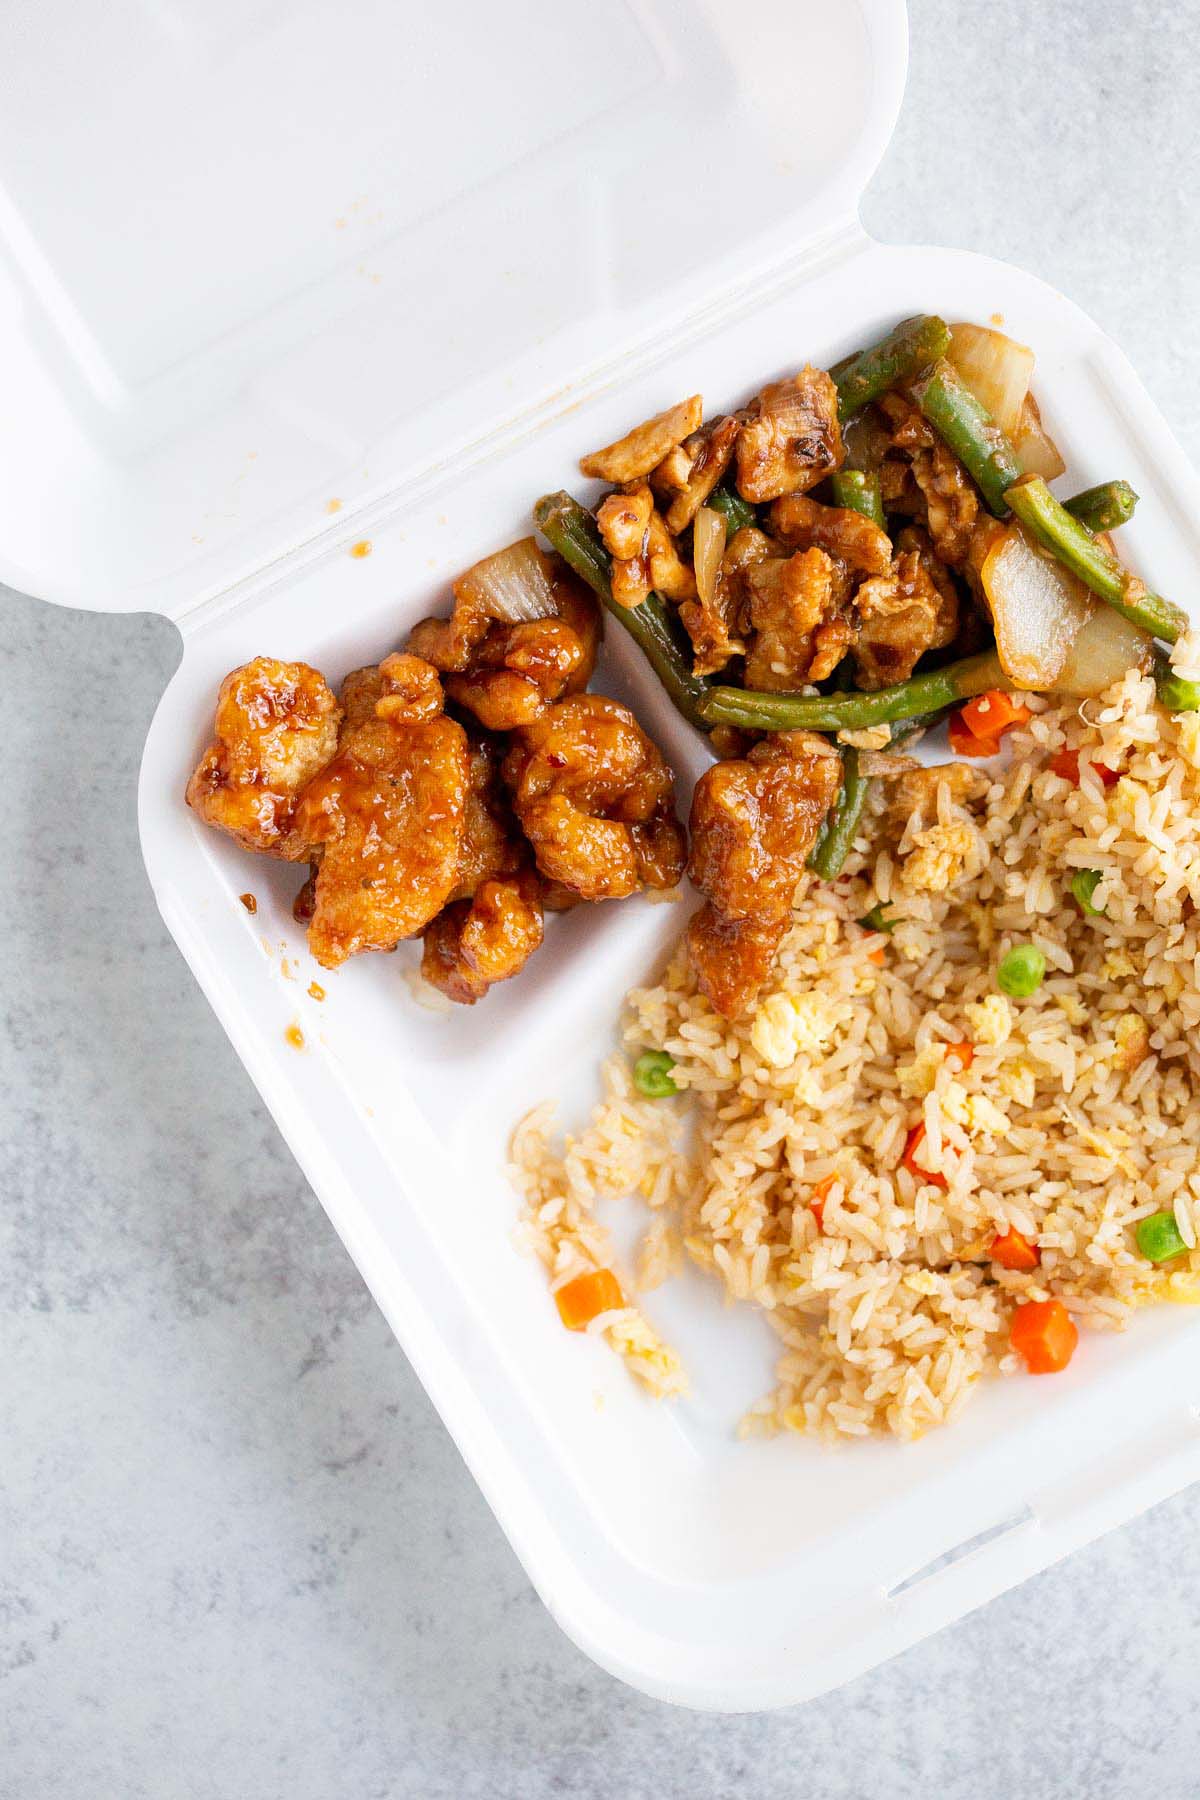 Panda Express leftovers in styrofoam container.